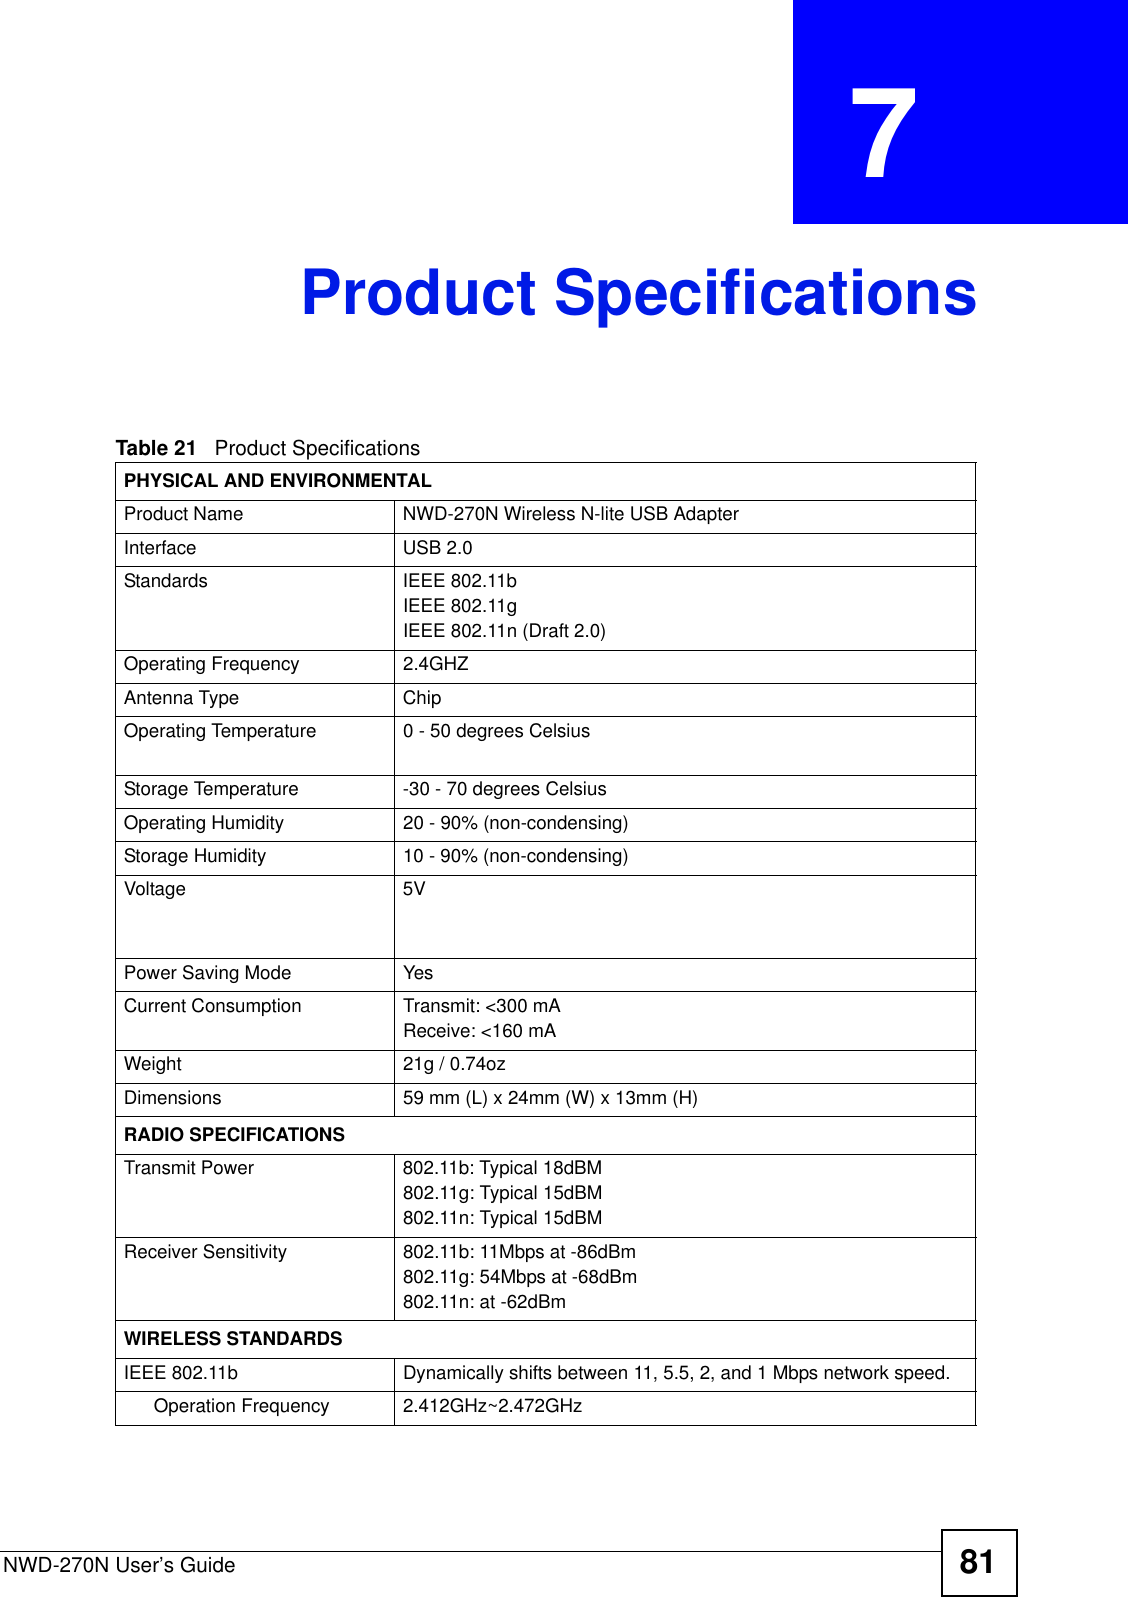 NWD-270N User’s Guide 81CHAPTER  7 Product SpecificationsTable 21   Product Specifications PHYSICAL AND ENVIRONMENTALProduct Name  NWD-270N Wireless N-lite USB AdapterInterface USB 2.0Standards IEEE 802.11bIEEE 802.11gIEEE 802.11n (Draft 2.0)Operating Frequency 2.4GHZAntenna Type ChipOperating Temperature 0 - 50 degrees CelsiusStorage Temperature -30 - 70 degrees CelsiusOperating Humidity 20 - 90% (non-condensing)Storage Humidity  10 - 90% (non-condensing)Voltage 5VPower Saving Mode YesCurrent Consumption Transmit: &lt;300 mAReceive: &lt;160 mAWeight 21g / 0.74ozDimensions 59 mm (L) x 24mm (W) x 13mm (H)RADIO SPECIFICATIONSTransmit Power 802.11b: Typical 18dBM802.11g: Typical 15dBM802.11n: Typical 15dBMReceiver Sensitivity 802.11b: 11Mbps at -86dBm802.11g: 54Mbps at -68dBm802.11n: at -62dBmWIRELESS STANDARDSIEEE 802.11b Dynamically shifts between 11, 5.5, 2, and 1 Mbps network speed.Operation Frequency 2.412GHz~2.472GHz